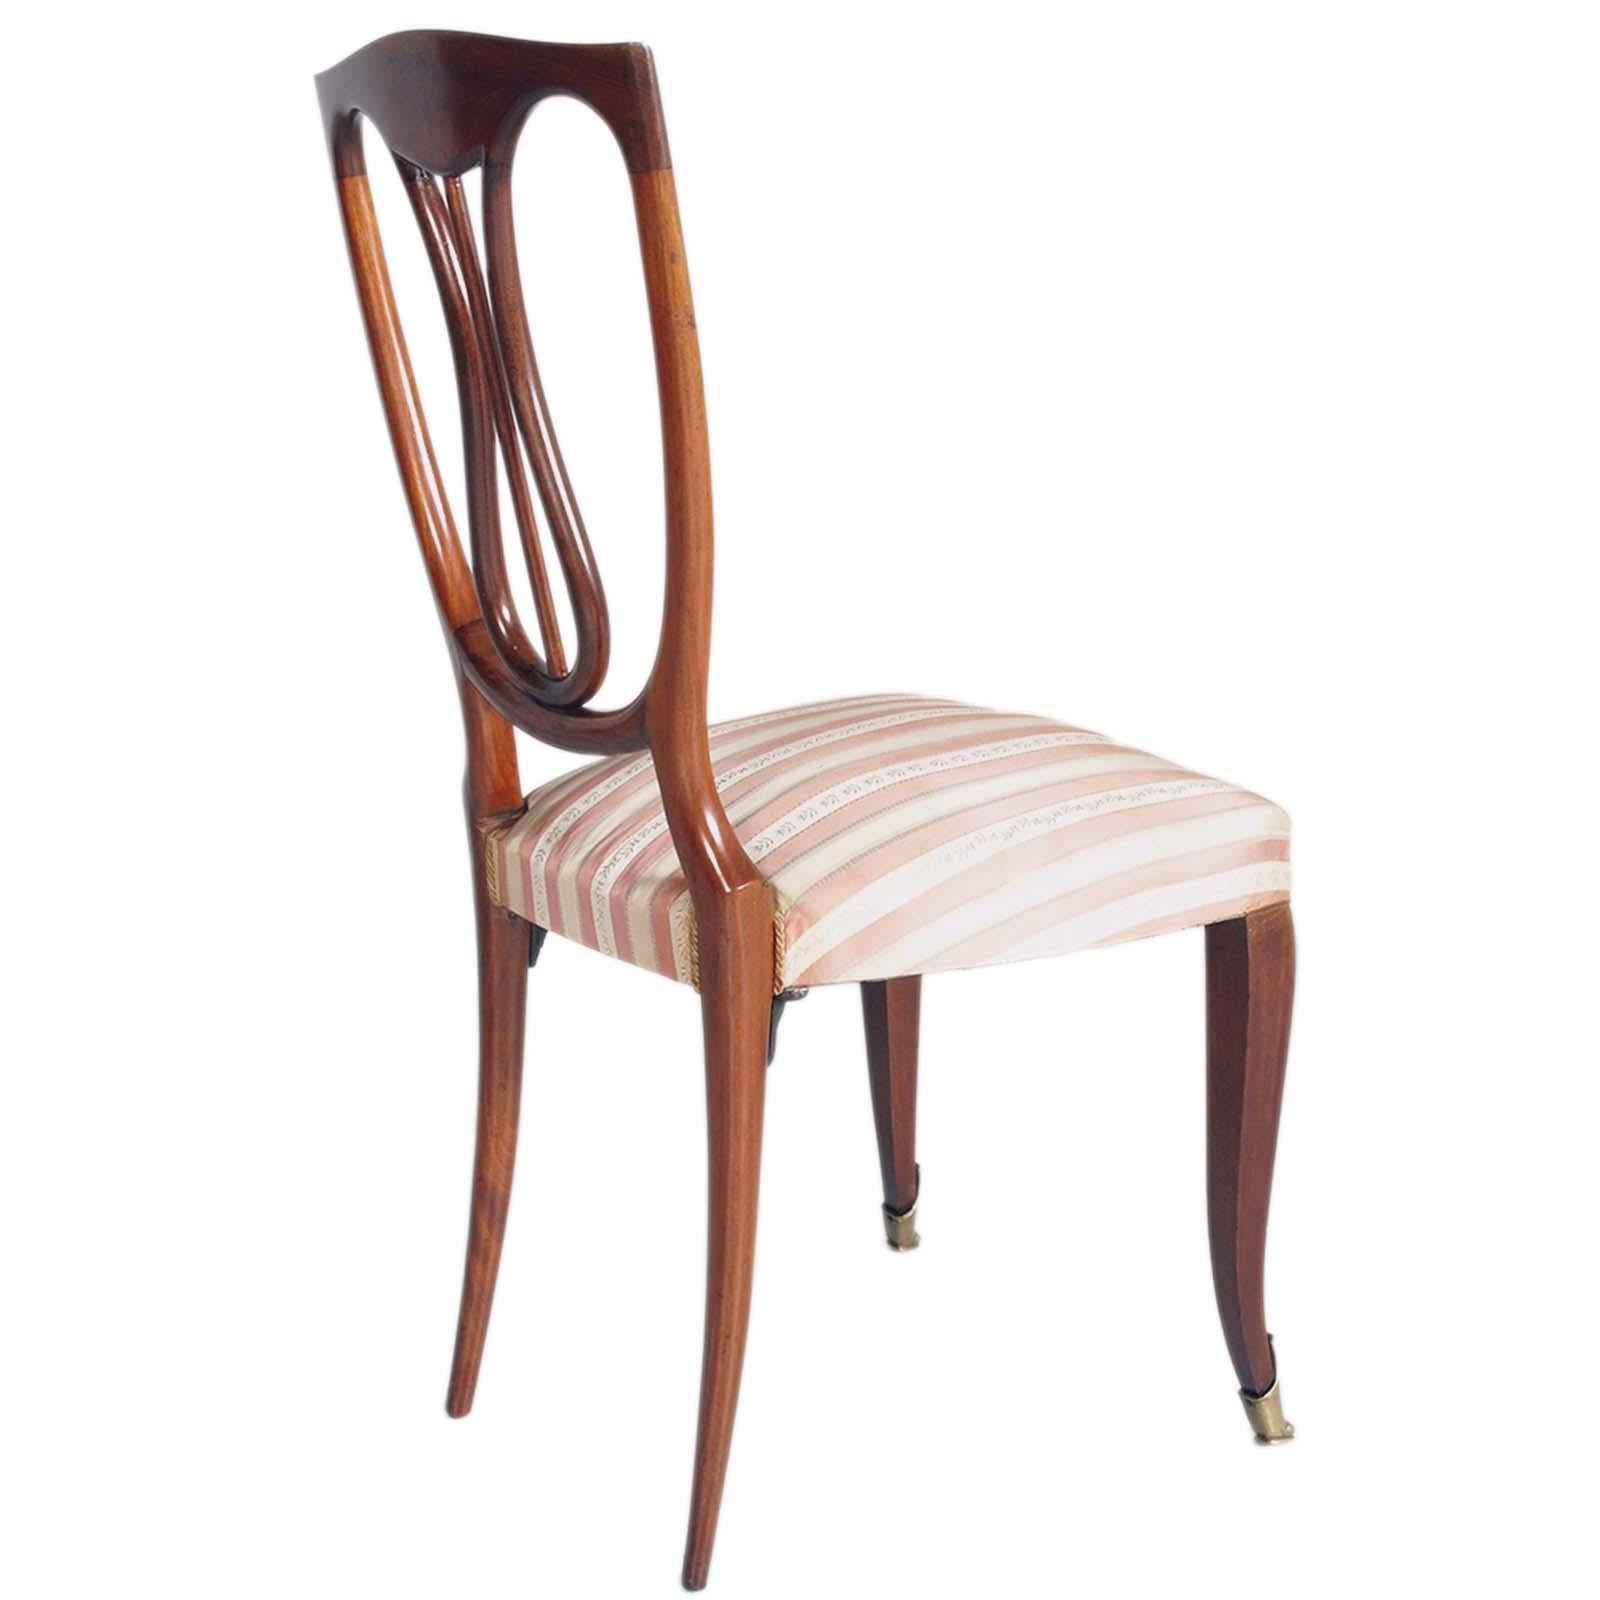 1940s chair styles